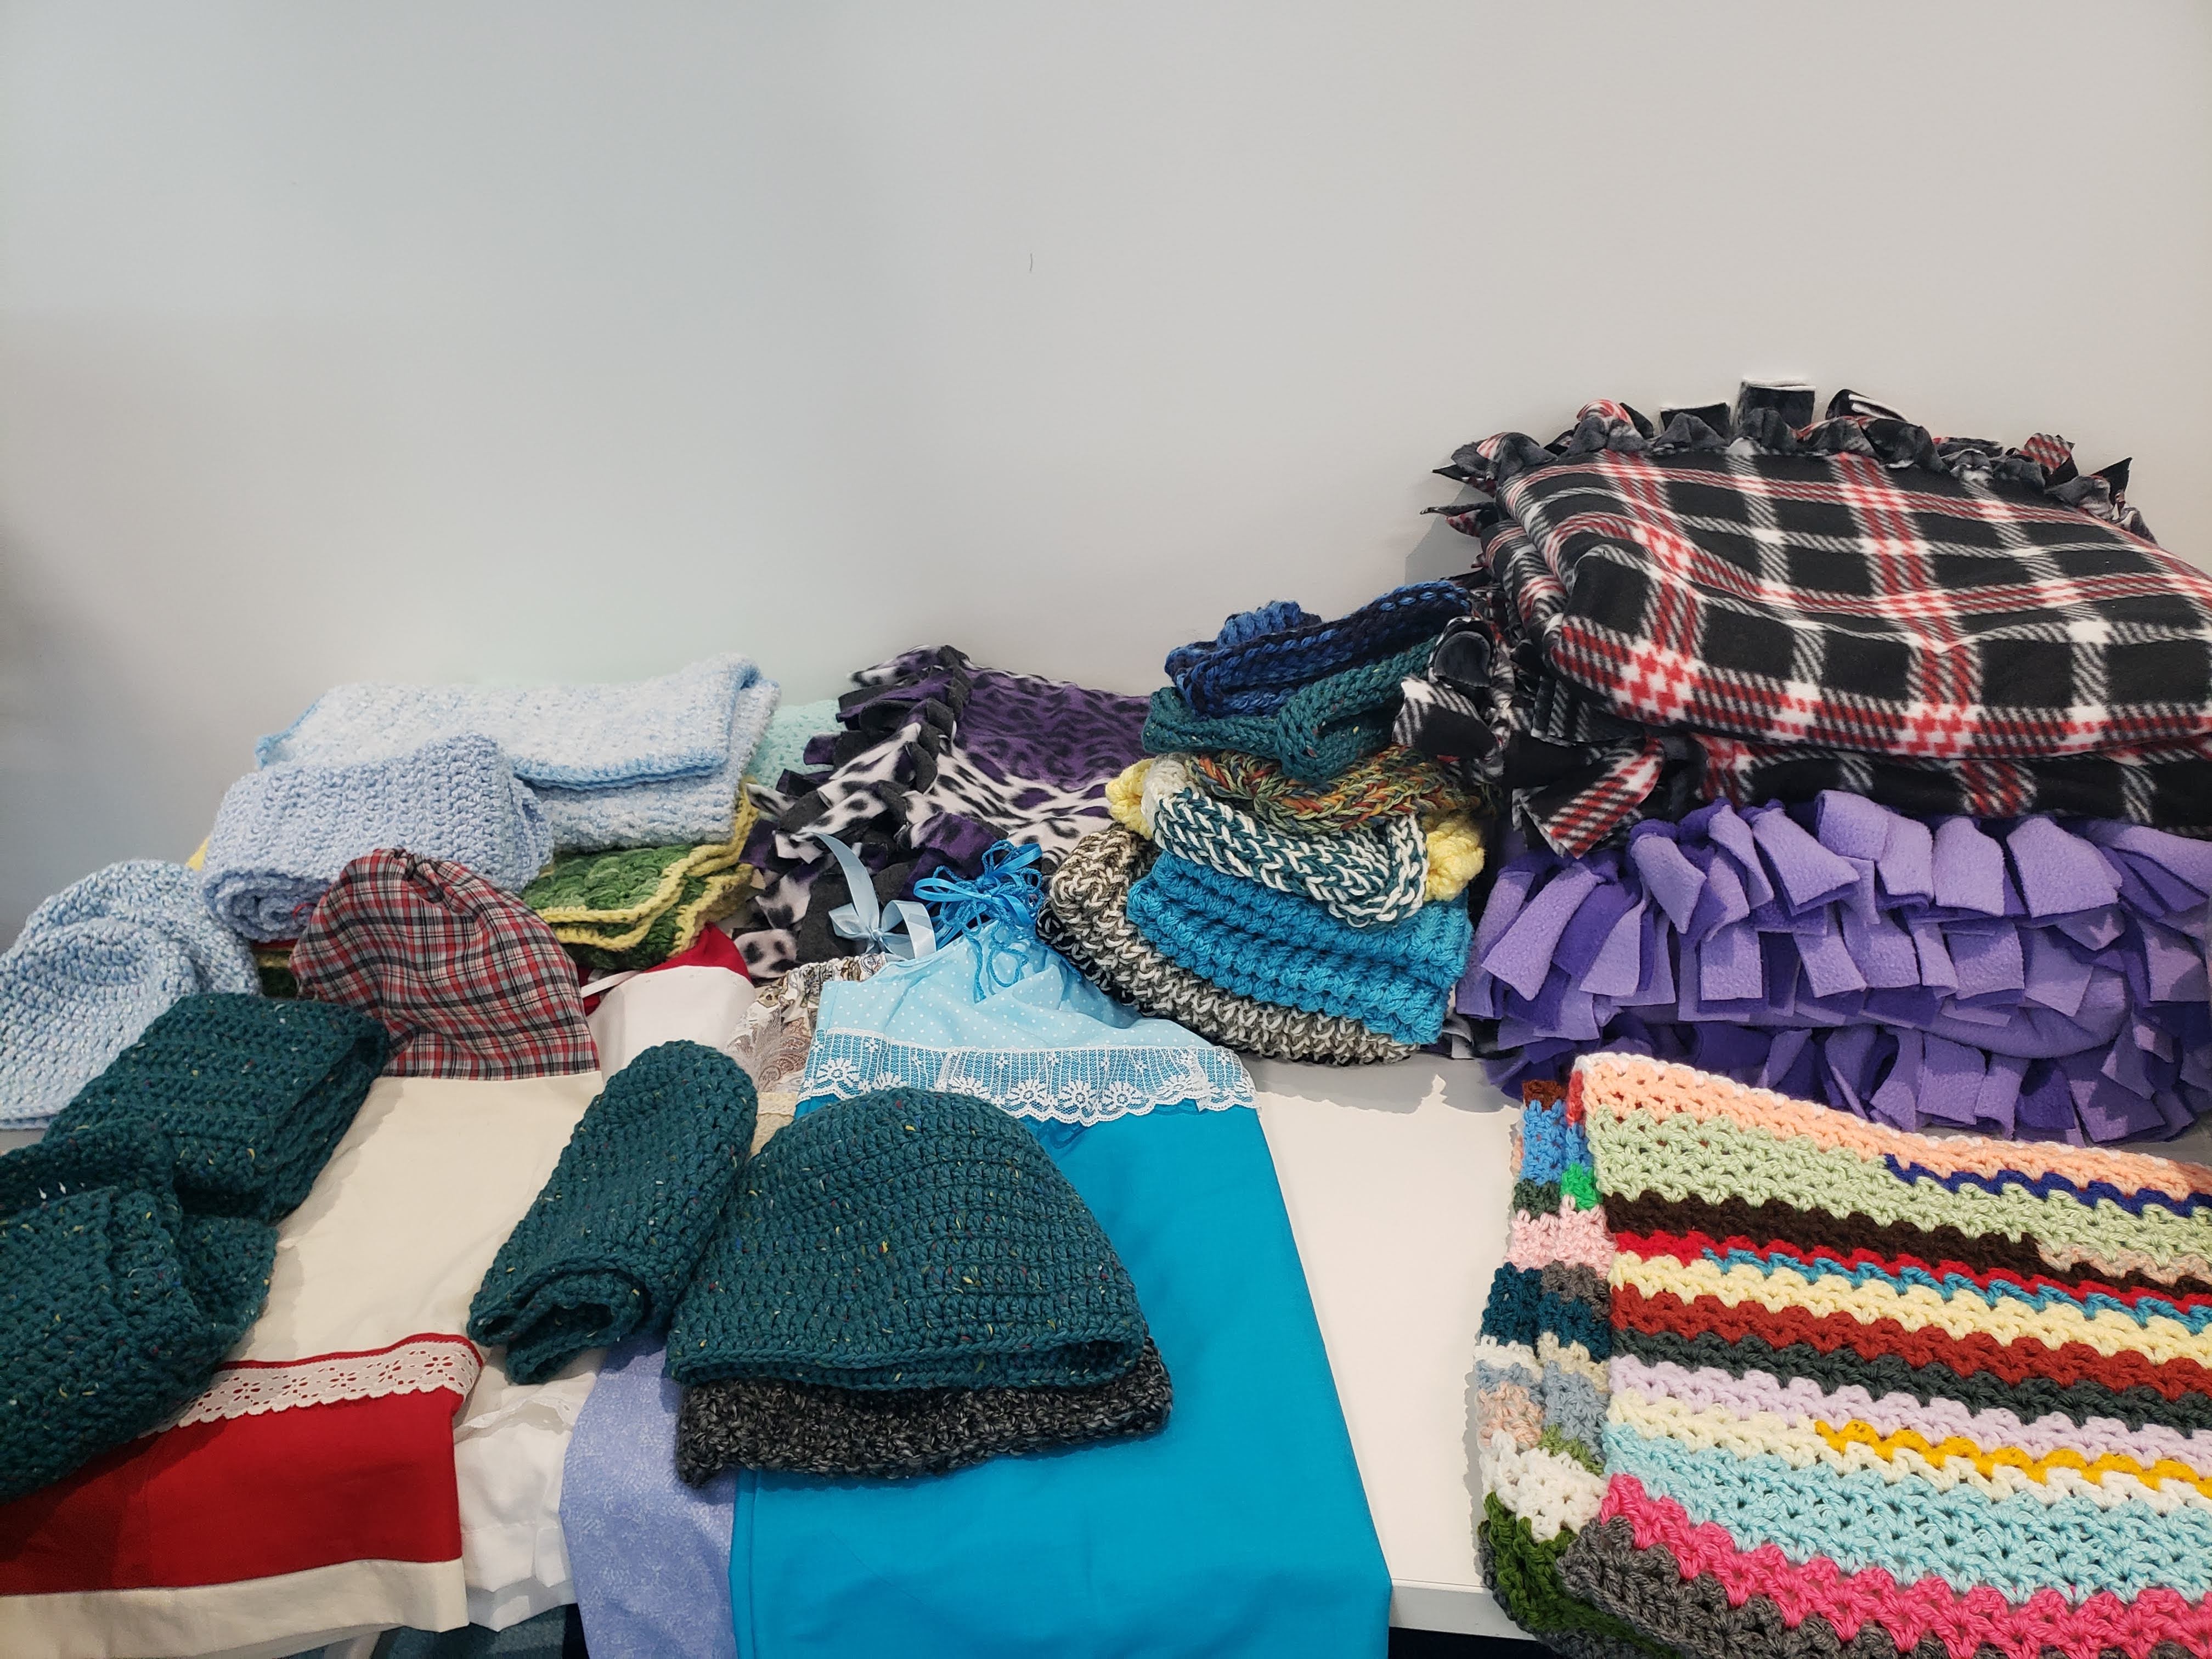 Crocheted, knitted and felted blankets; knitted hats and scarves; cloth children's dresses.